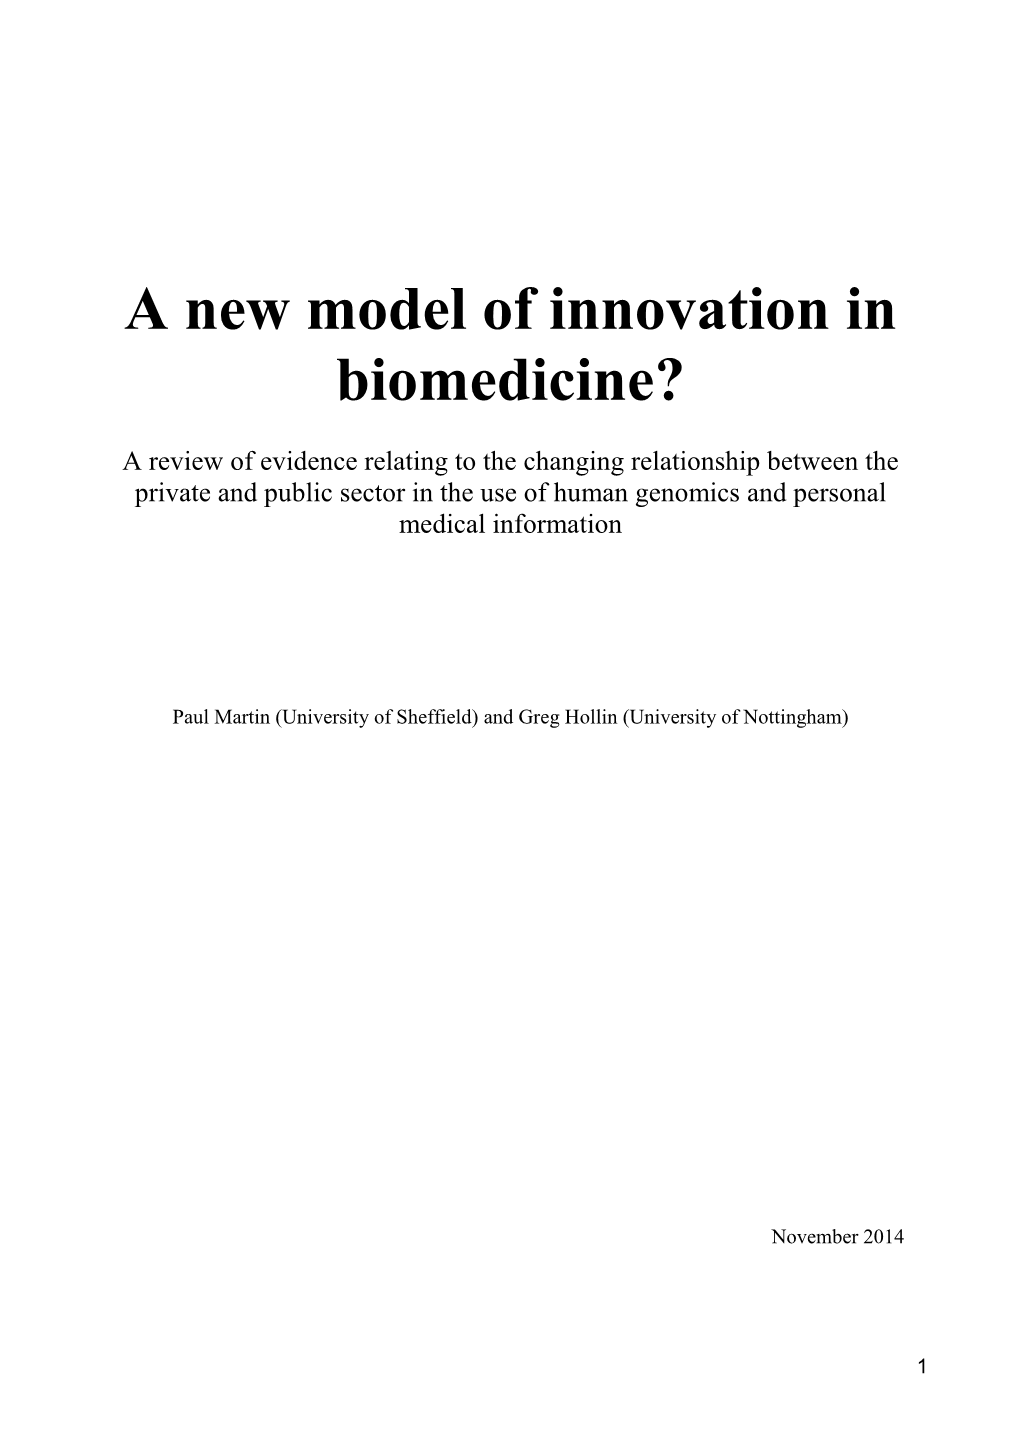 A New Model of Innovation in Biomedicine?